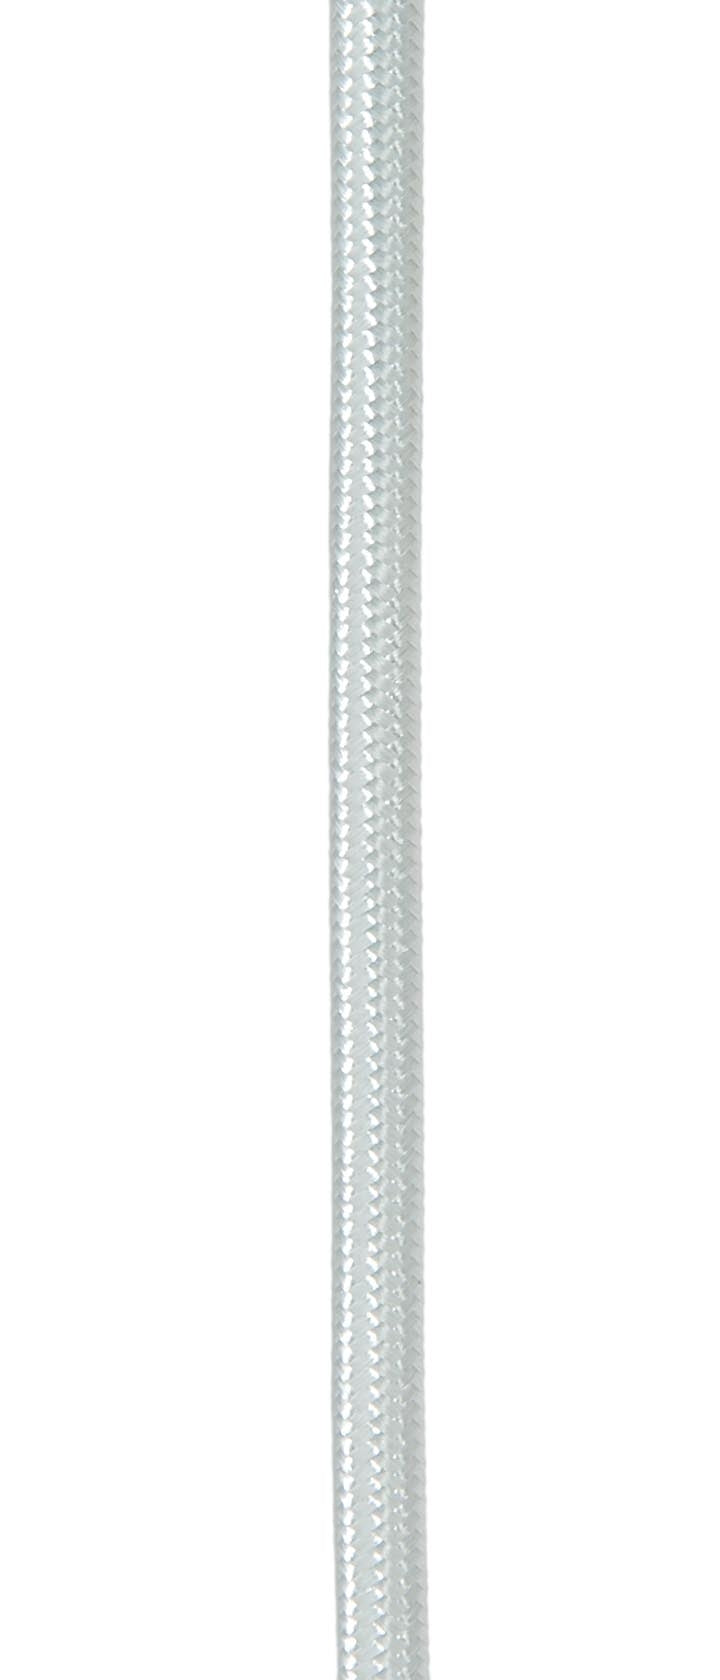 SVT-B Silver Color, Fabric Covered Parallel Fabric Lamp Cord - Choice of Length, UL Listed